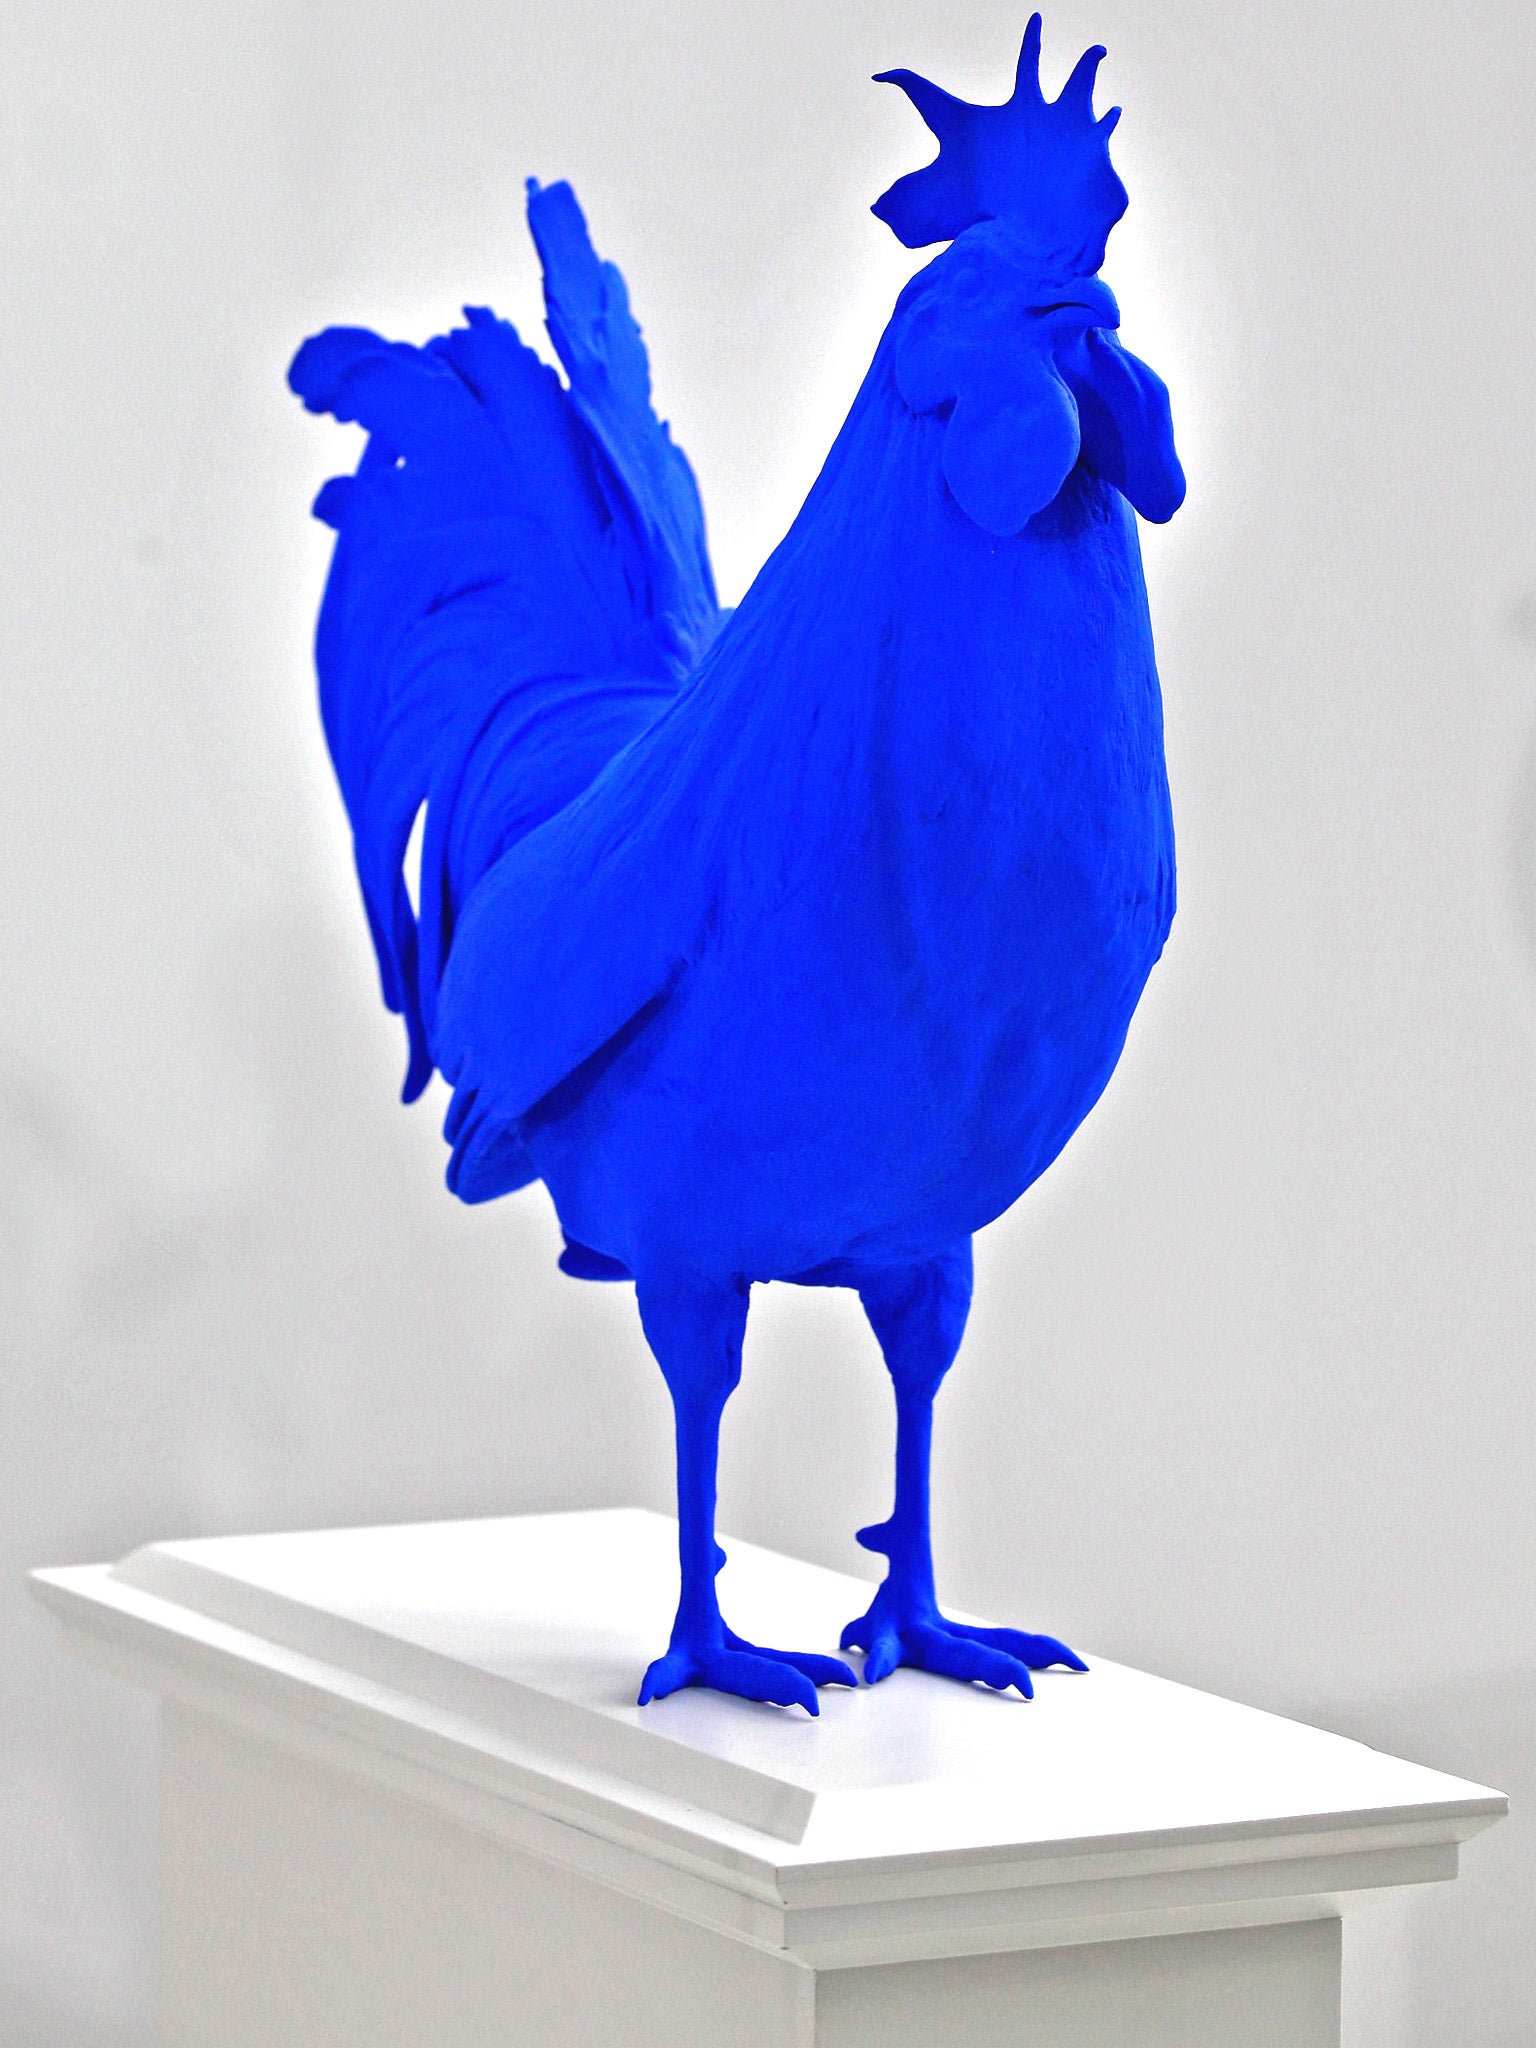 Campaigners have claimed the fibreglass bird is 'totally inappropriate' for the fourth plinth